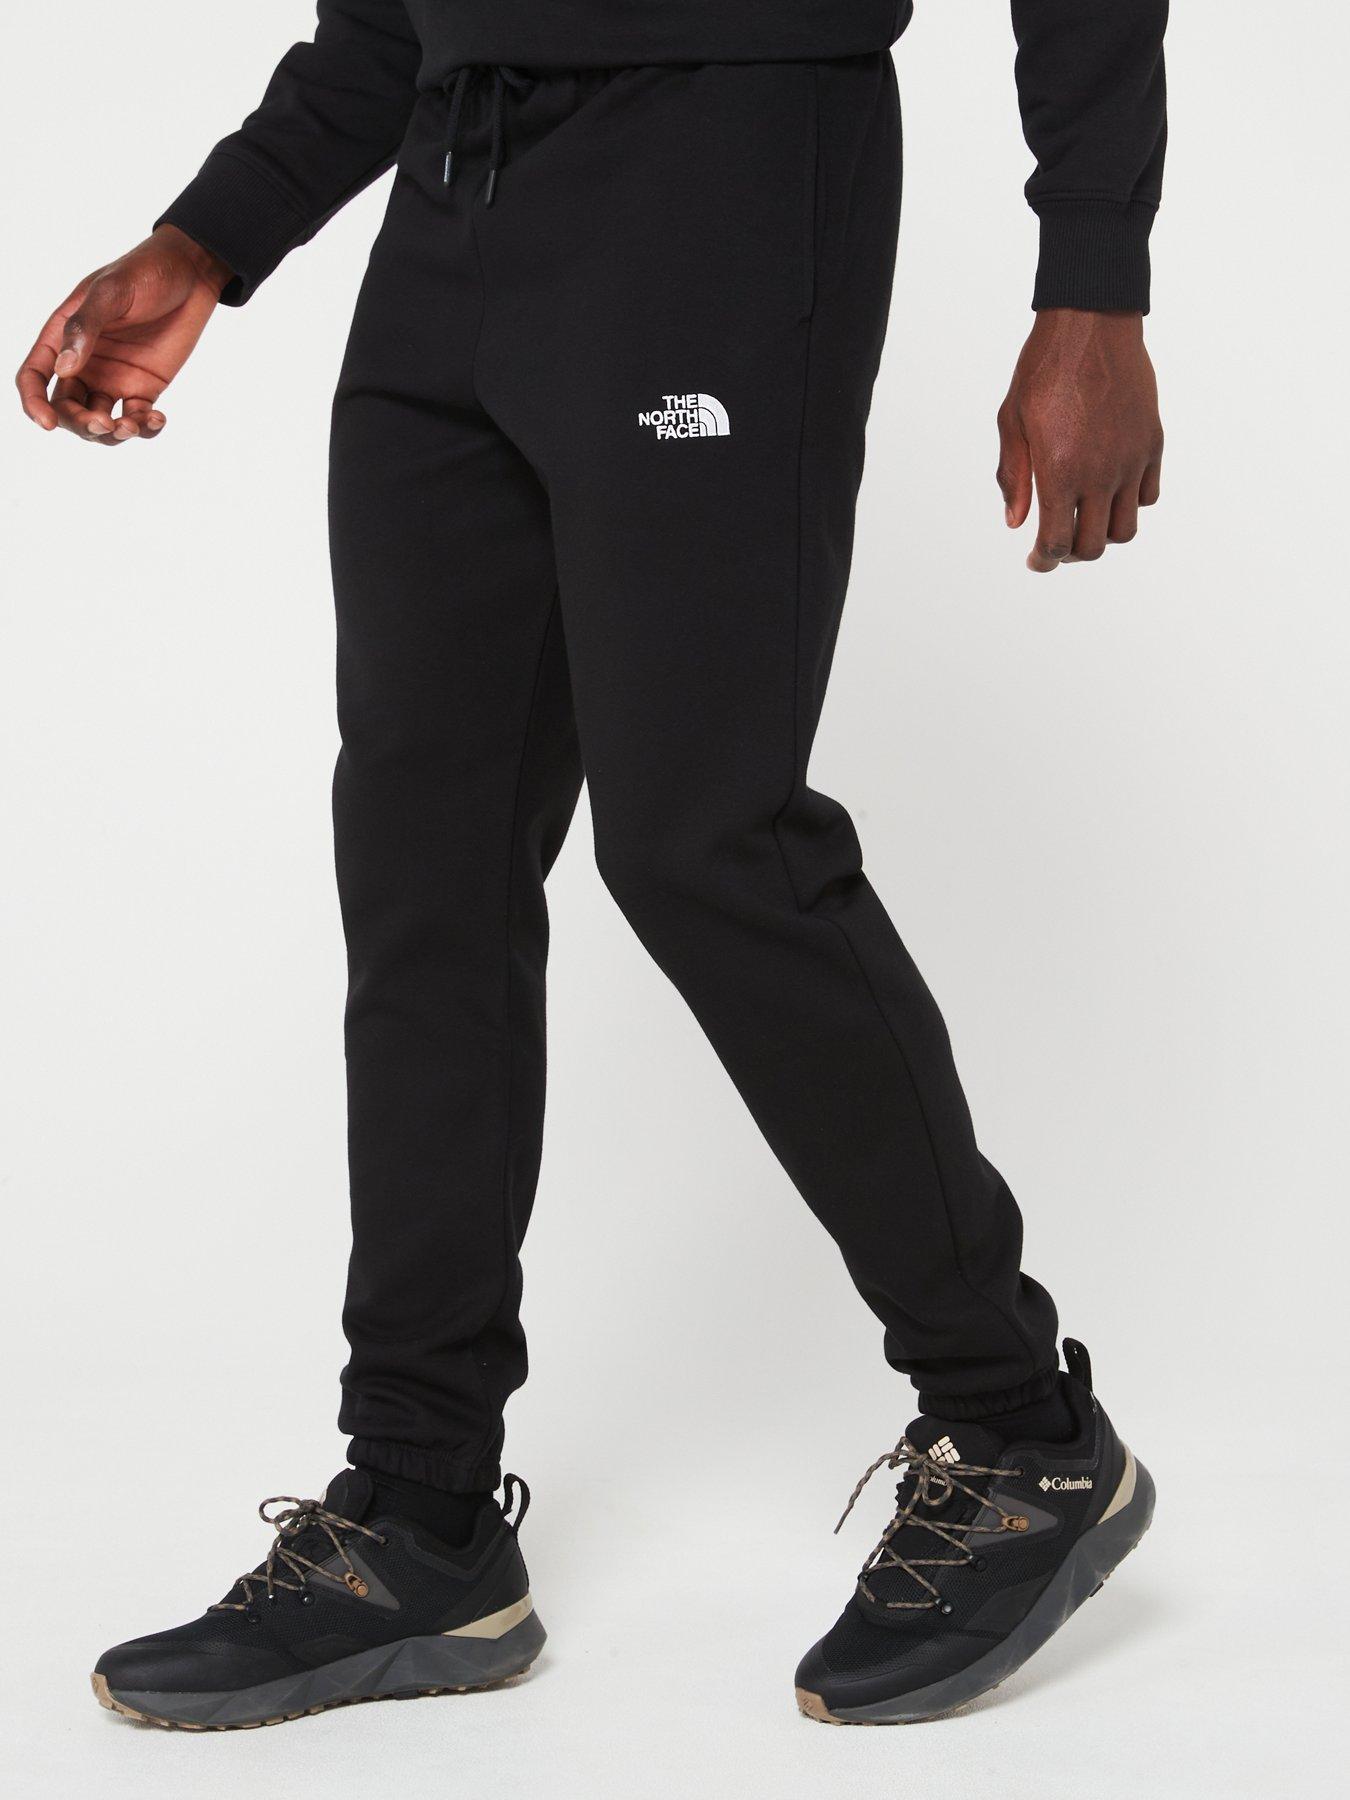 THE NORTH FACE UK Online